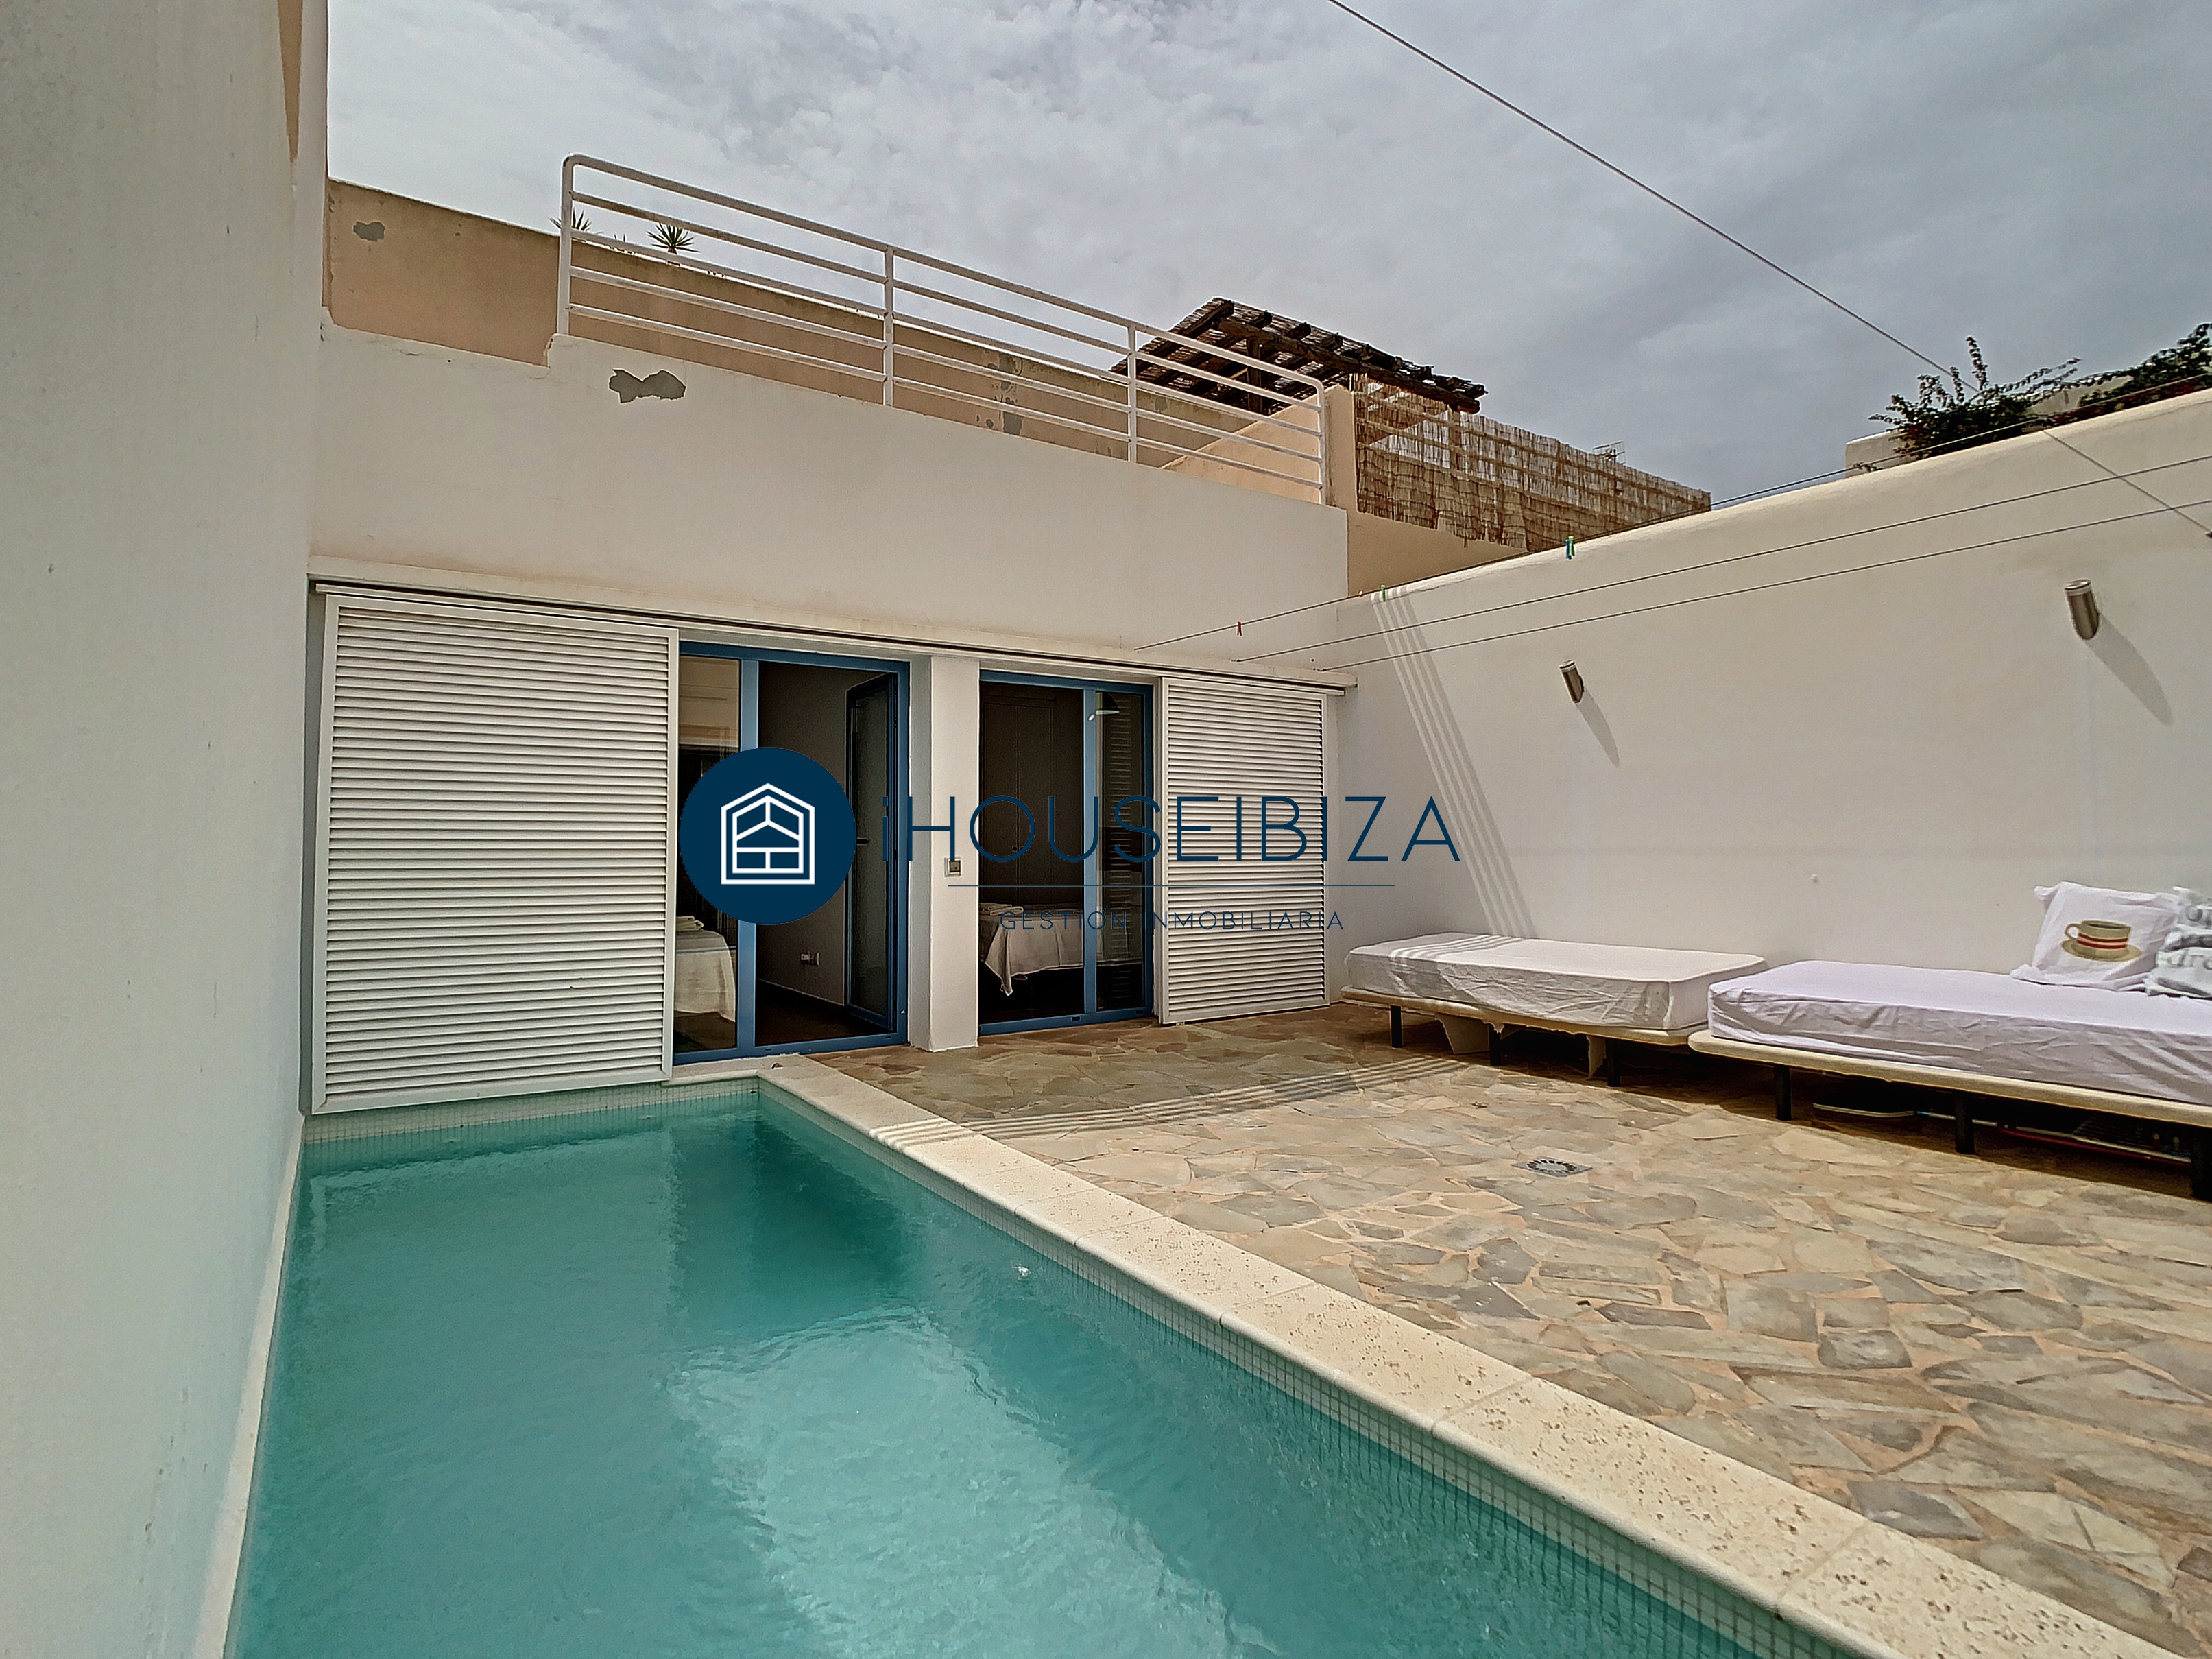 Wonderful HOUSE for SALE with PRIVATE POOL.